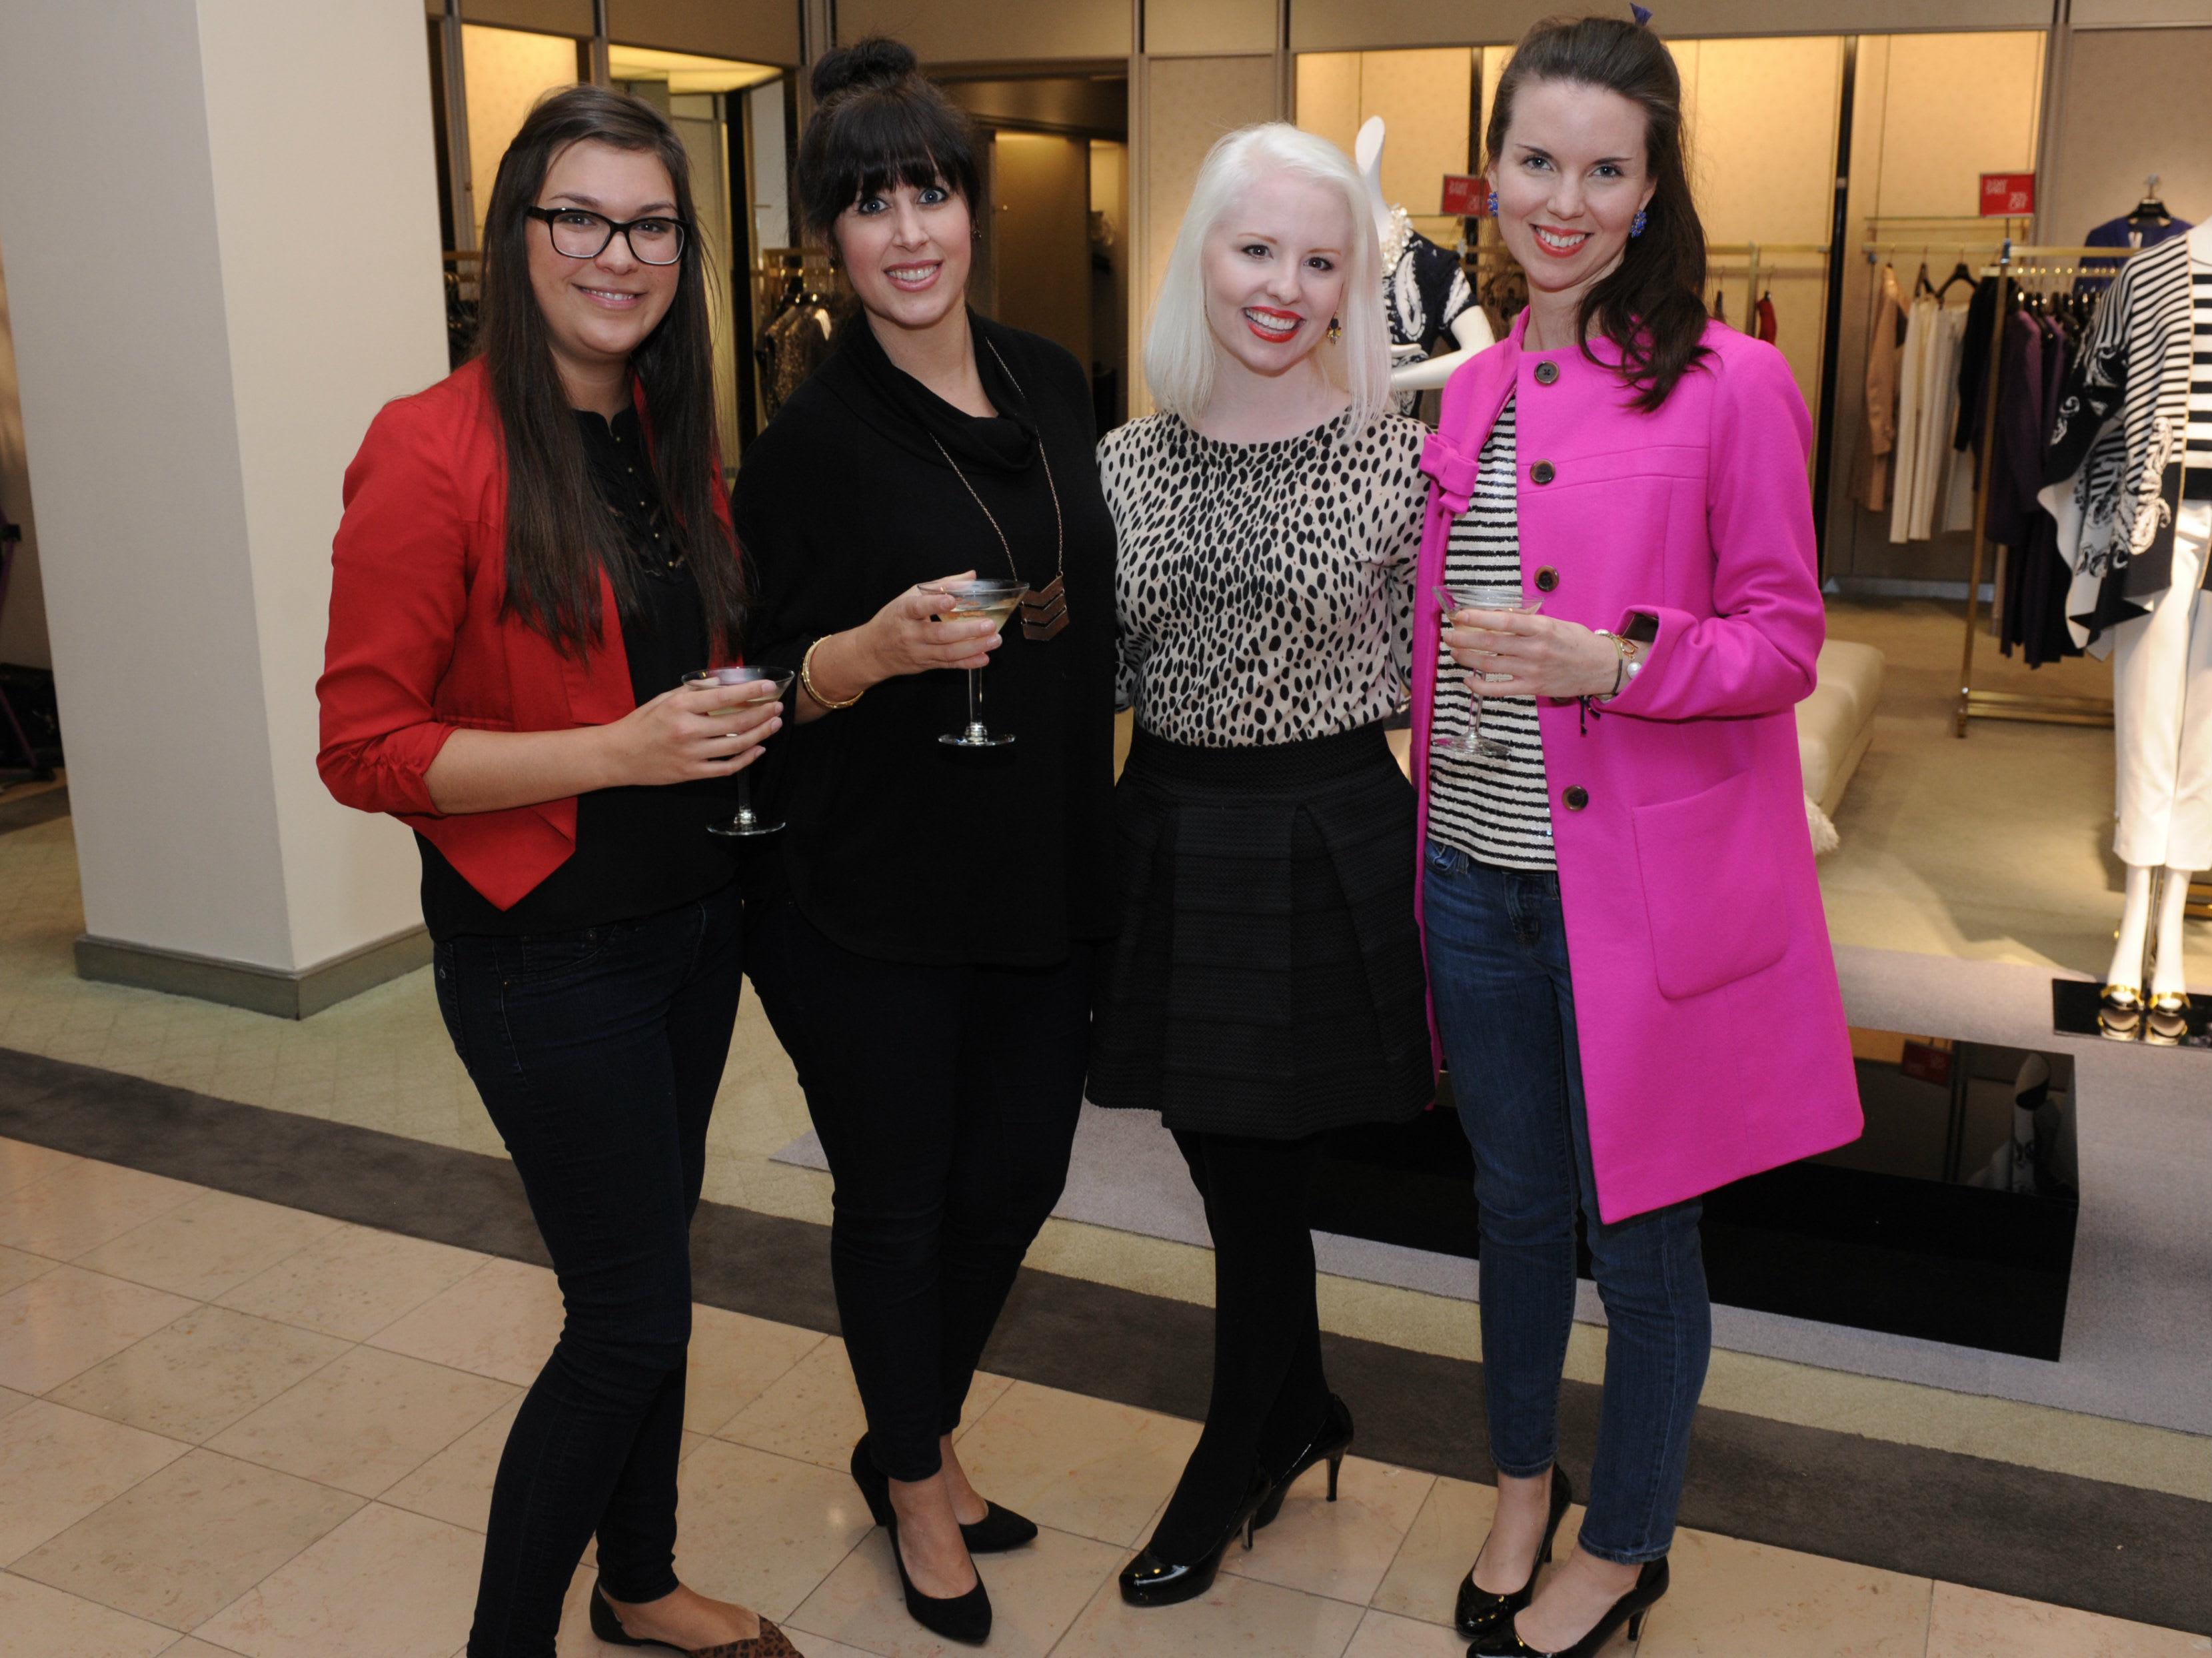 Dallas do-gooders fall into fashion with United Way at refined